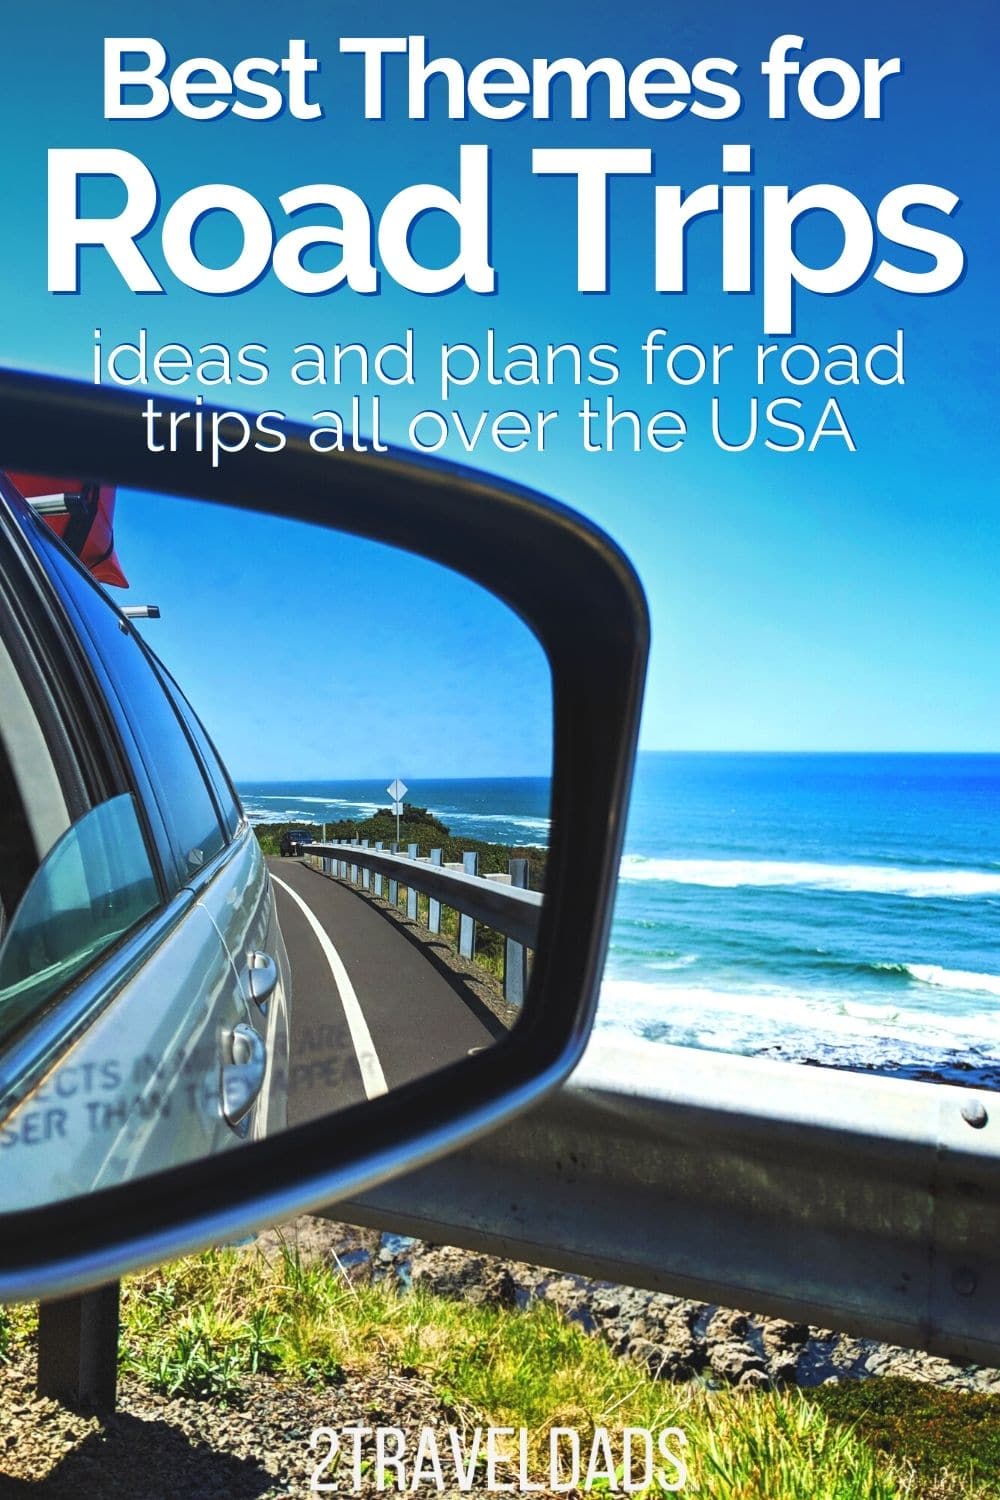 20+ road trip themes that you will never forget. From epic photography journeys to family fun or romantic vacations, these road trip themes and plans are sure to inspire new and amazing adventures.